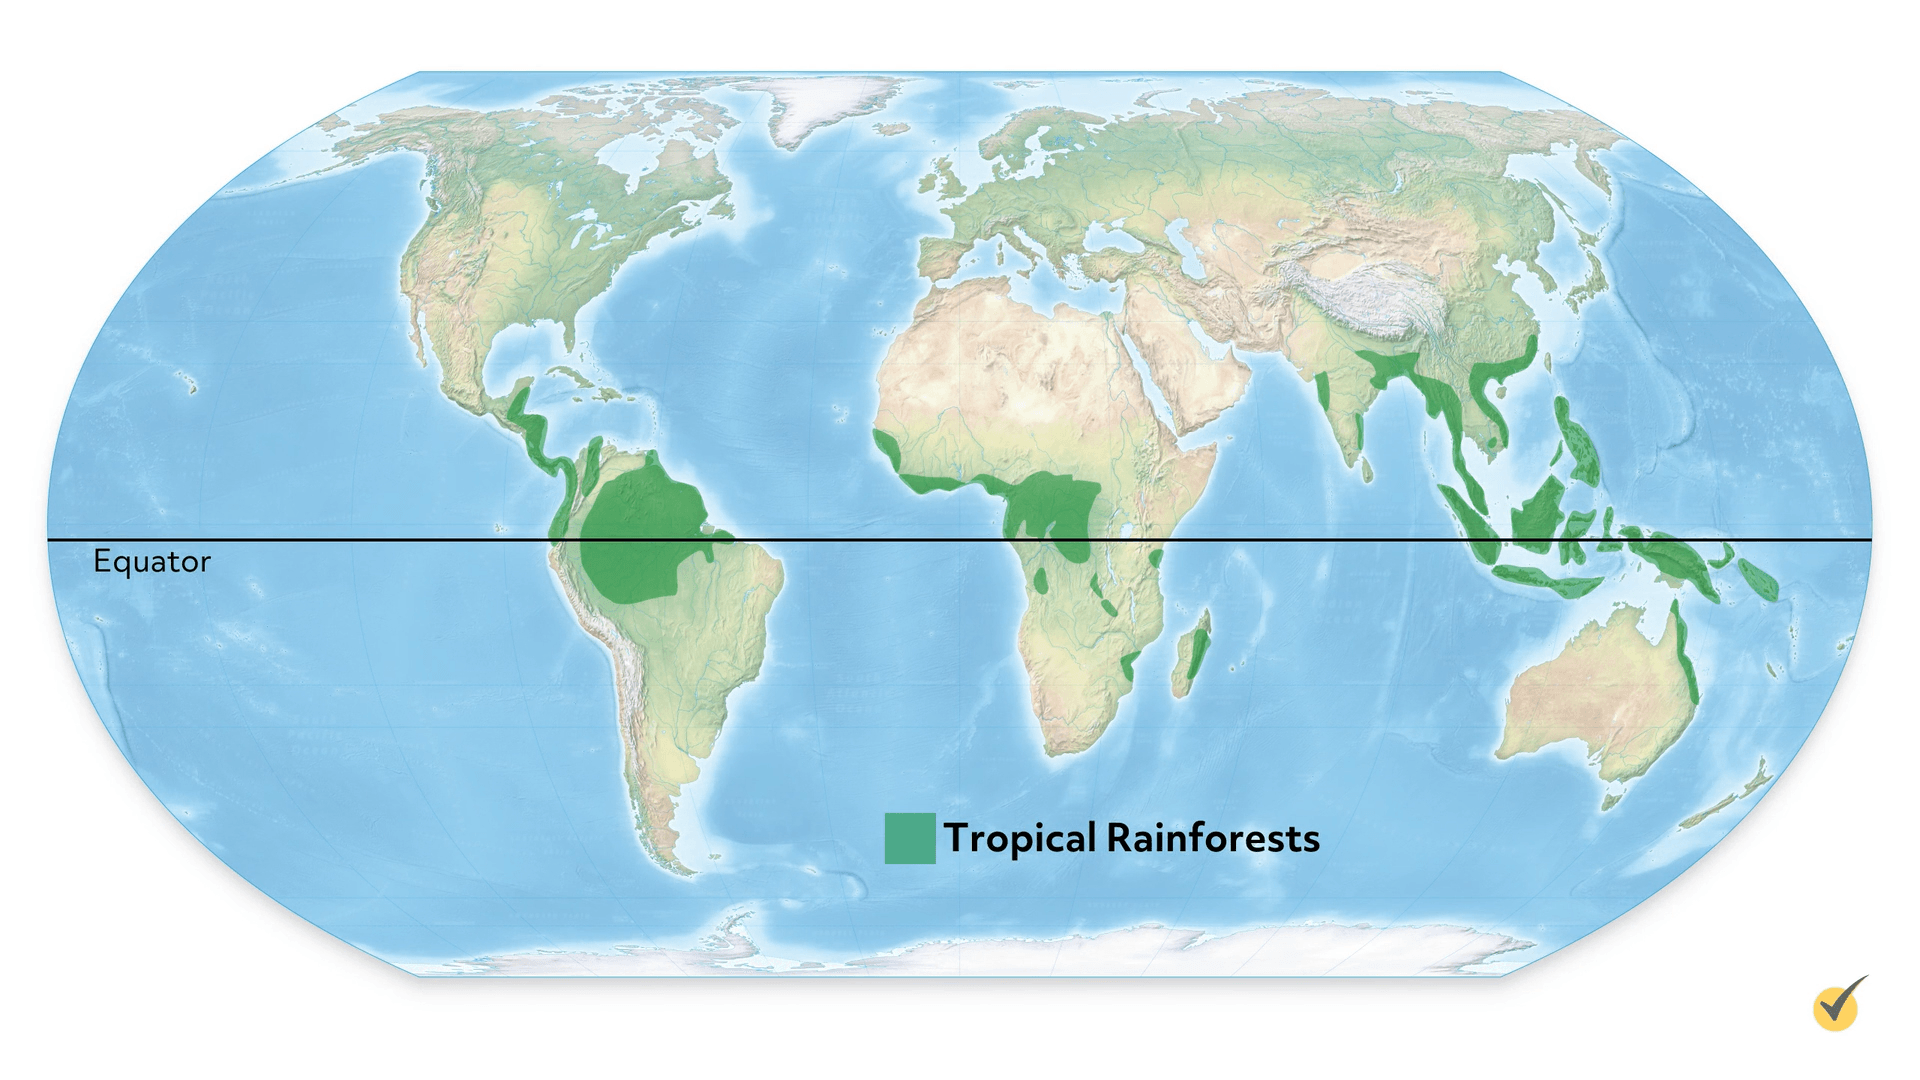 Image of the equator drawn over the tropical rainforests. 